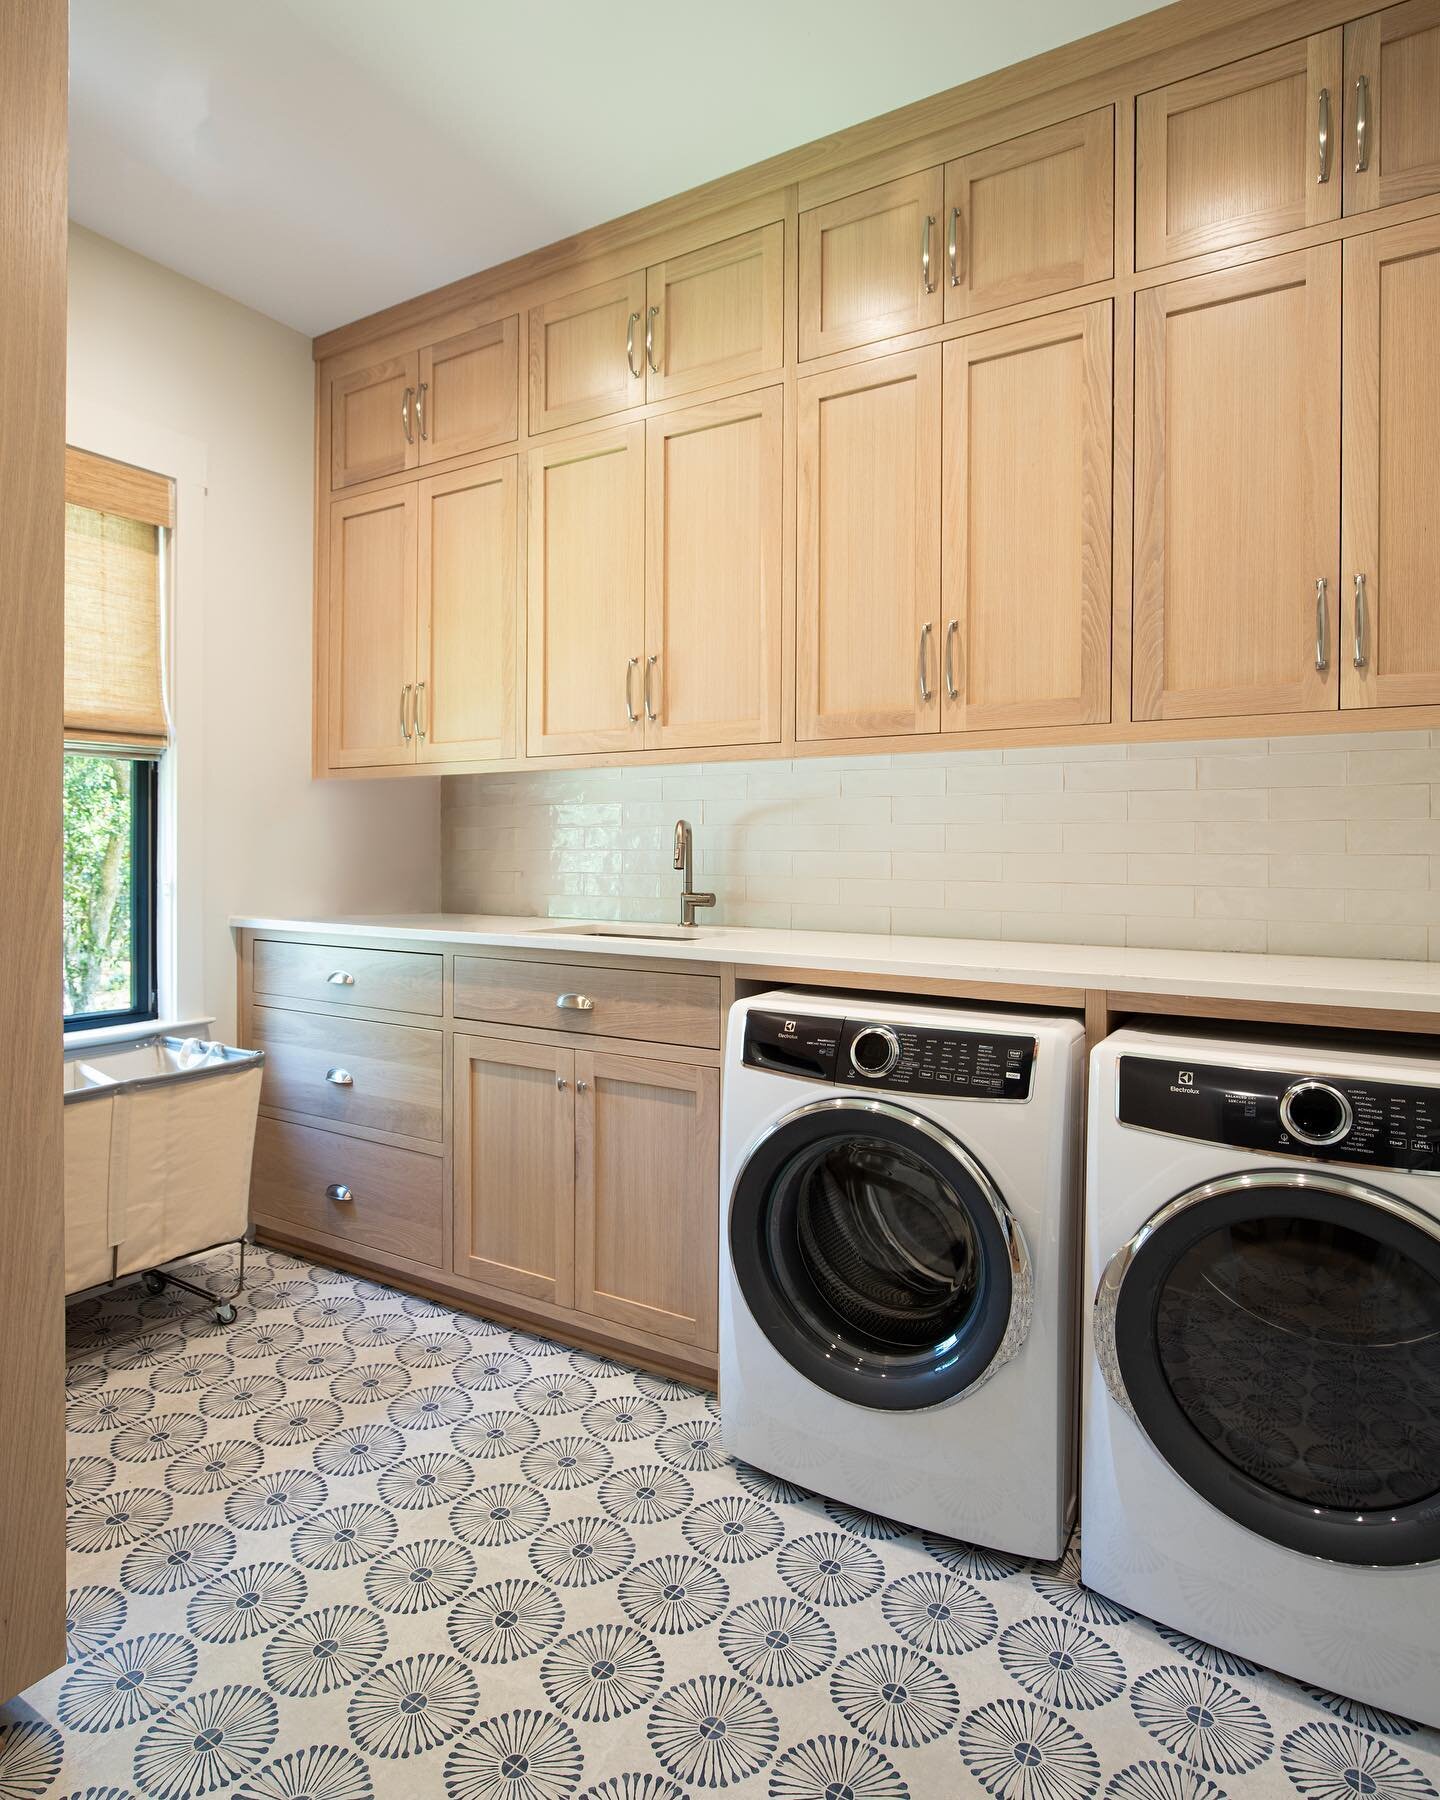 Laundry day just got a whole lot less boring 👀 The ceiling-high cabinetry in a light oak provides ample storage space, while the blue patterned tiles on the floor add a little color and personality to the space. While we can&rsquo;t actually make do